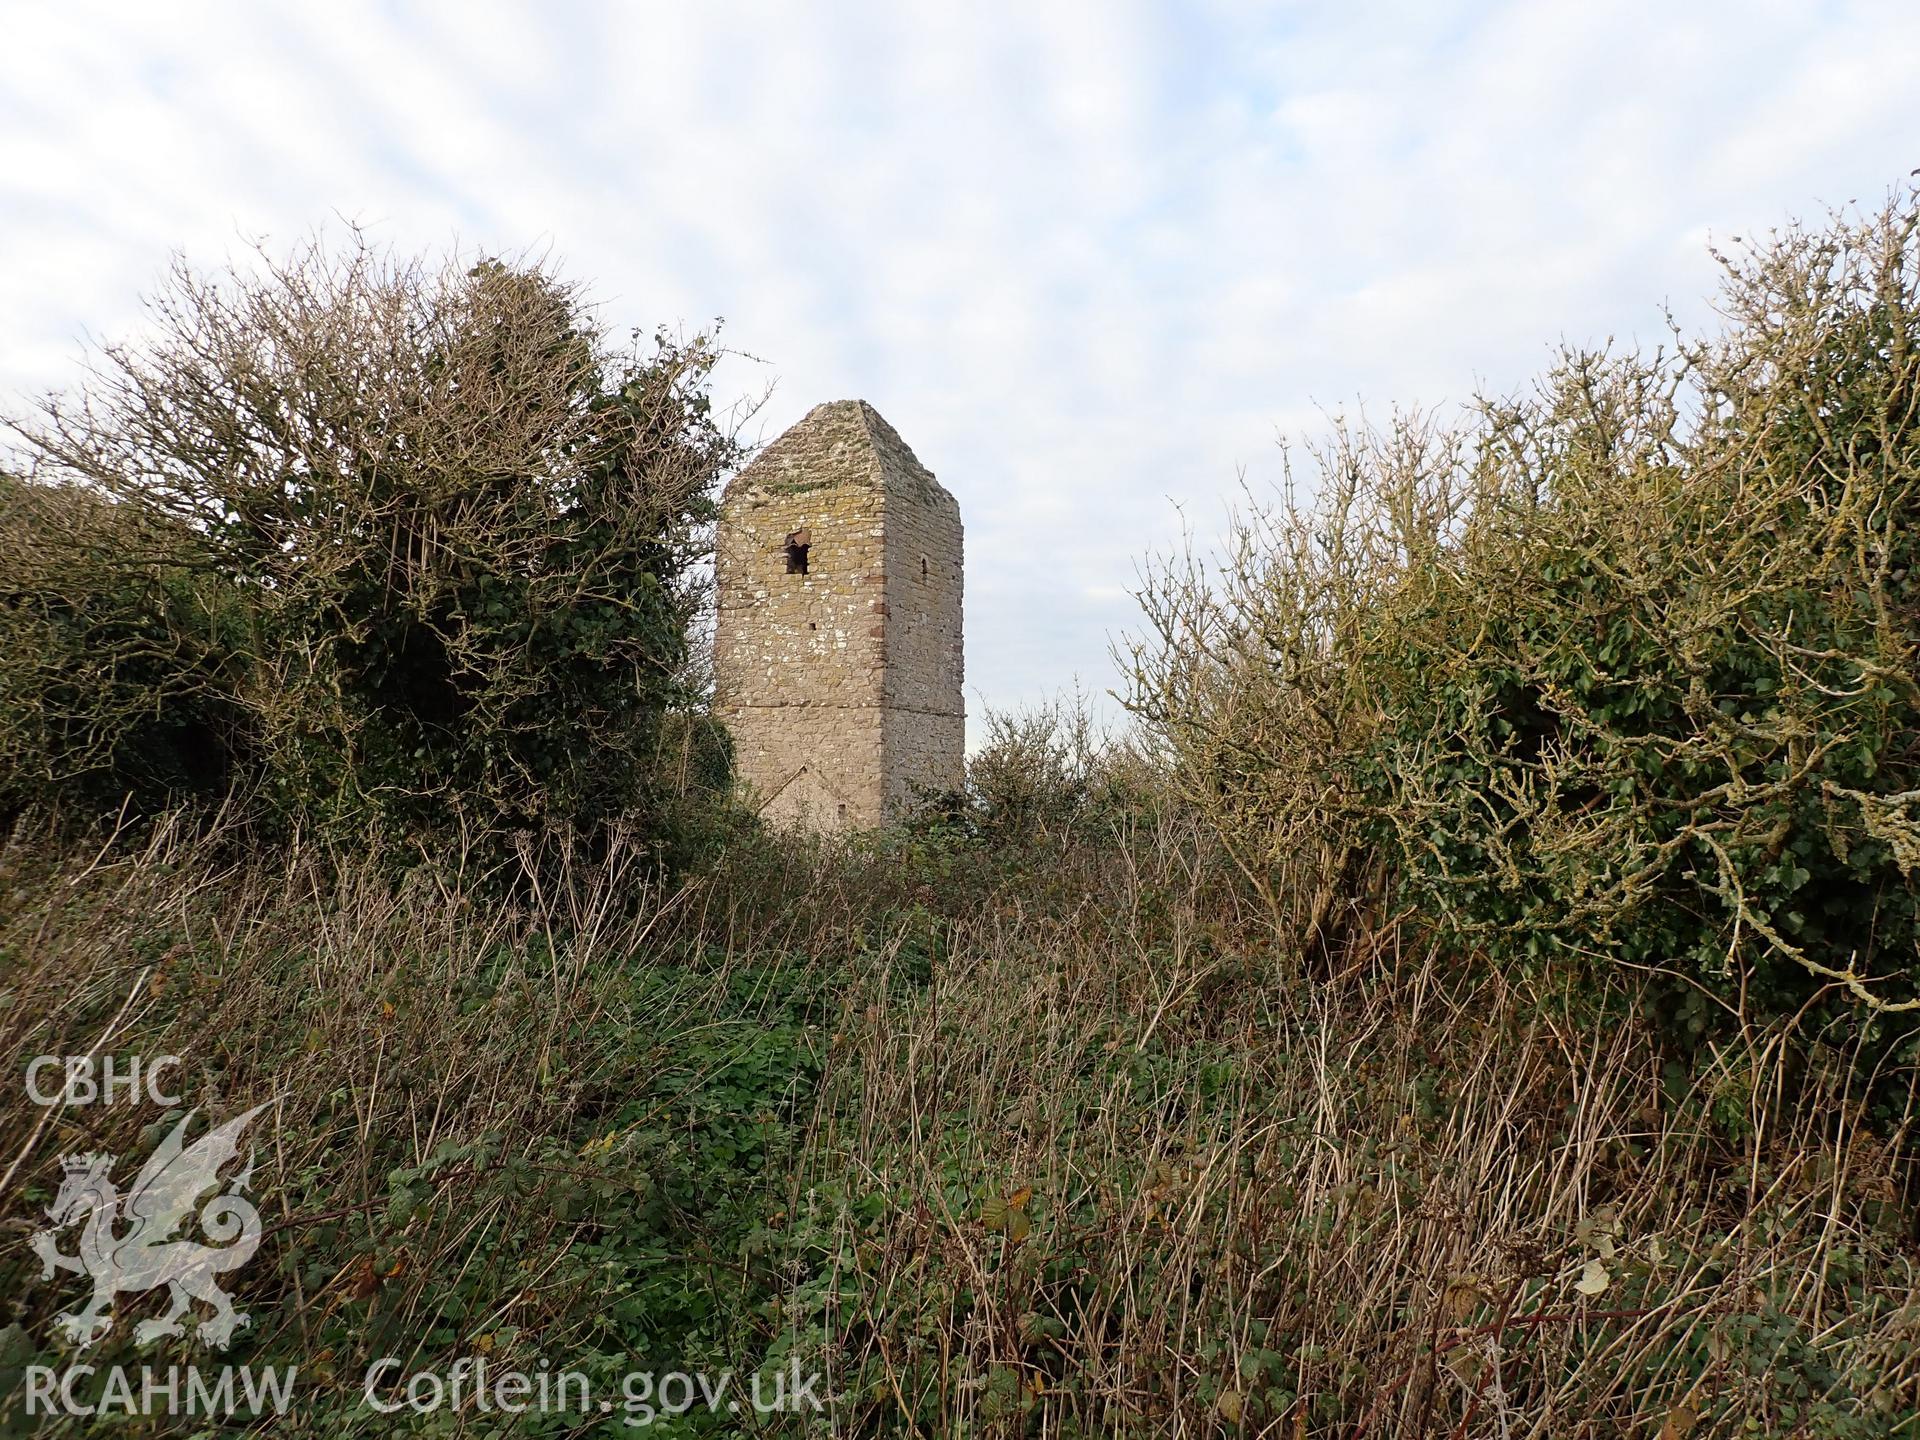 Investigator's photographic survey of the church on Puffin Island or Ynys Seiriol for the CHERISH Project. Winter view of church tower from south-east, showing overgrown environs. ? Crown: CHERISH PROJECT 2018. Produced with EU funds through the Ireland Wales Co-operation Programme 2014-2020. All material made freely available through the Open Government Licence.